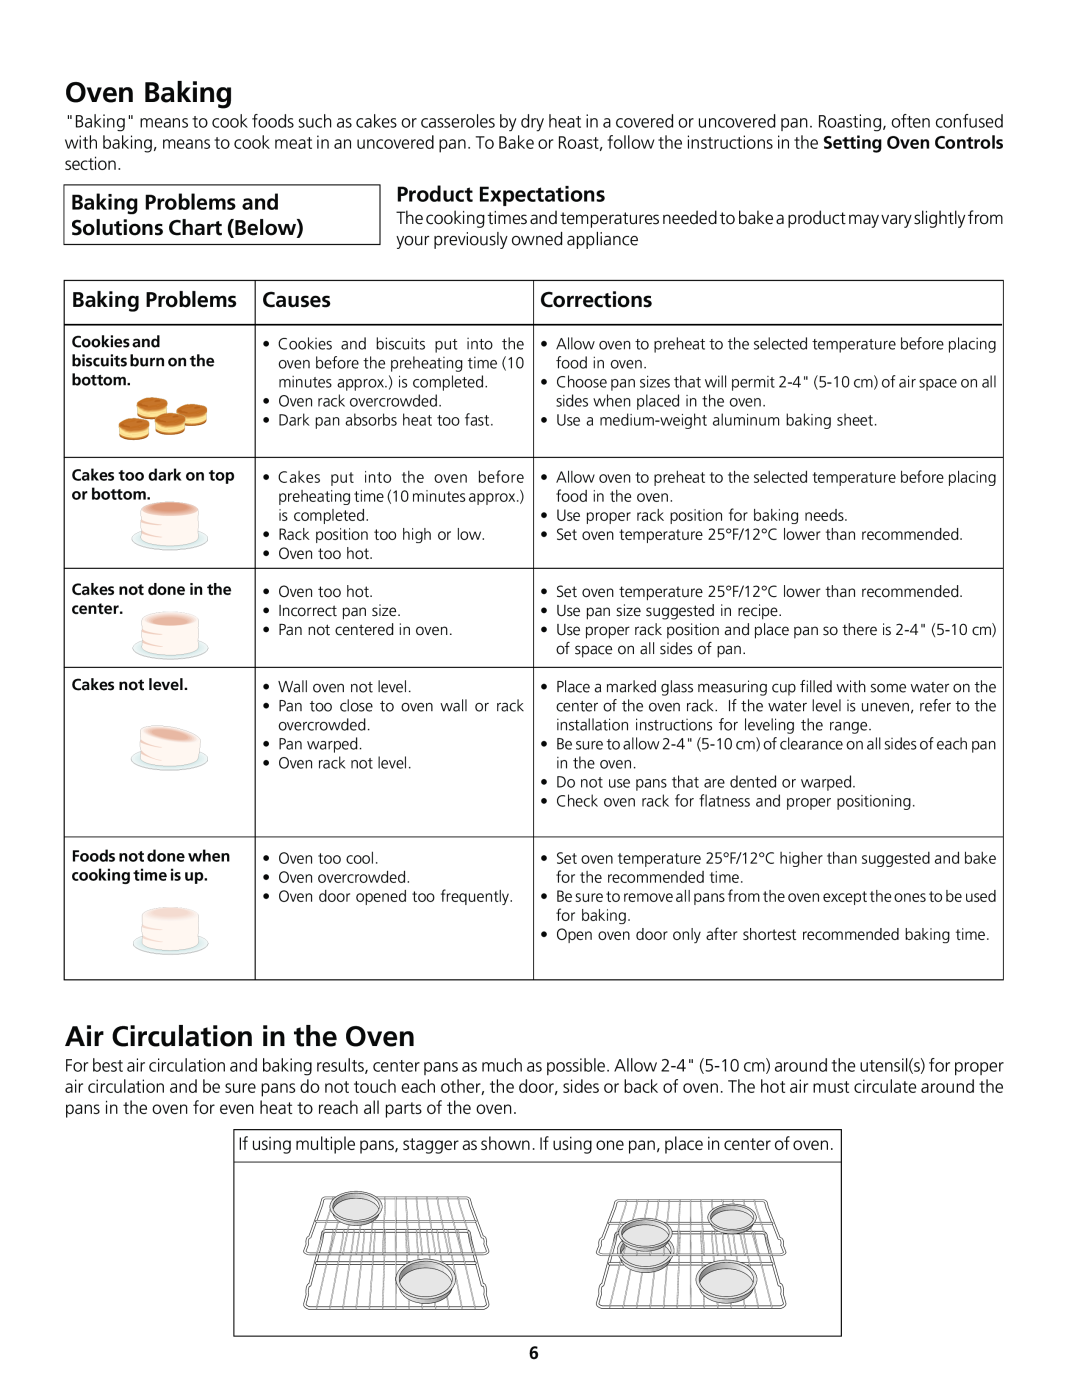 Frigidaire Gas Wall Oven Oven Baking, Air Circulation in the Oven, Baking Problems and Solutions Chart Below, Causes 